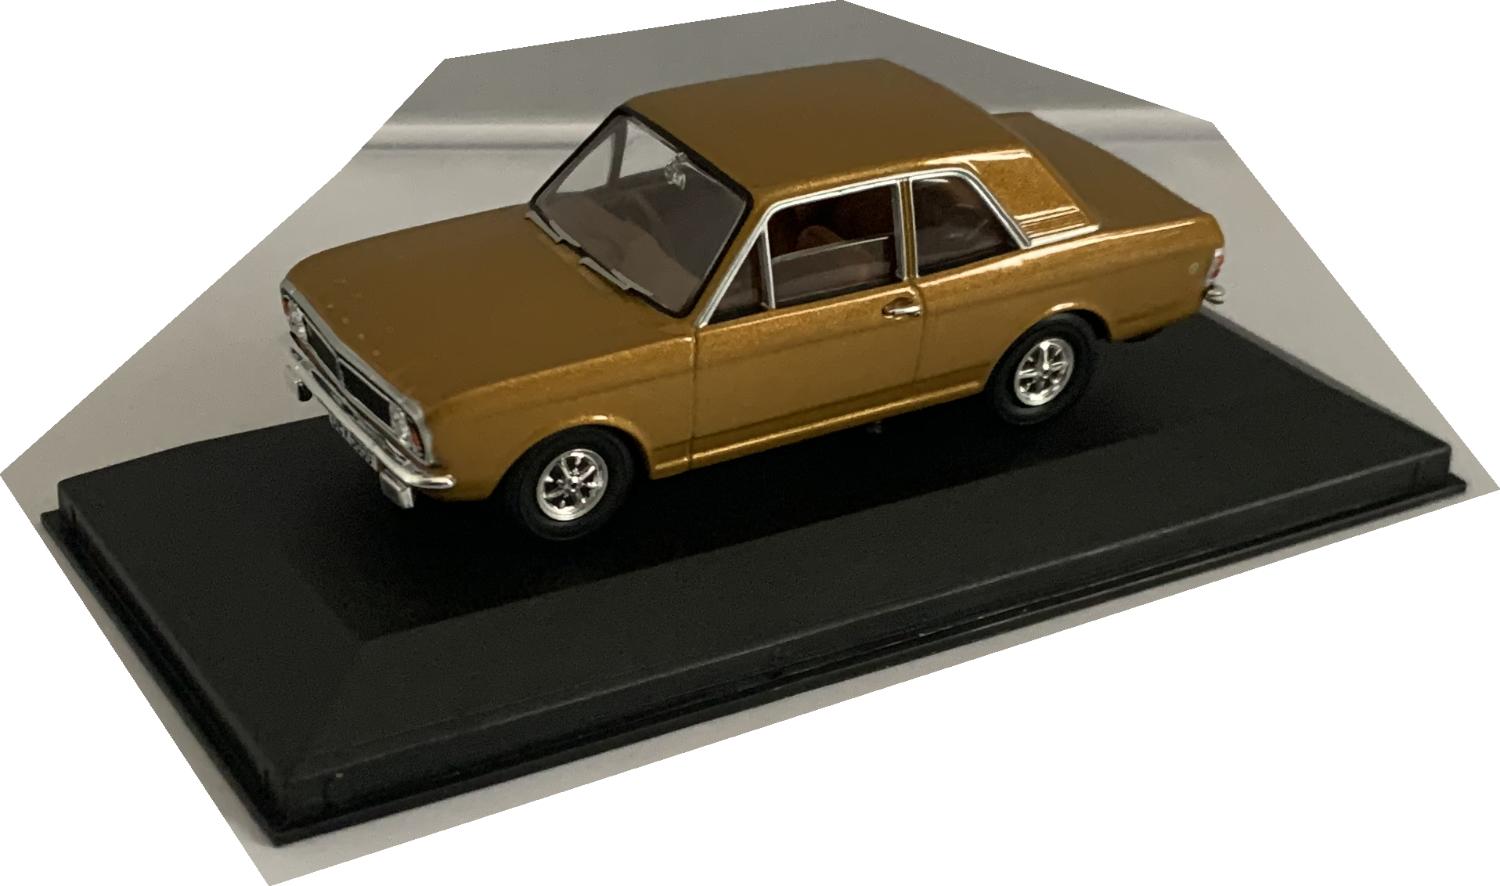 Lotus Ford Cortina mk 2 Twin Cam (Lotus) in amber gold, 1968  Colin Chapman’s car, 1:43 scale model from Corgi Vanguards, limited edition model